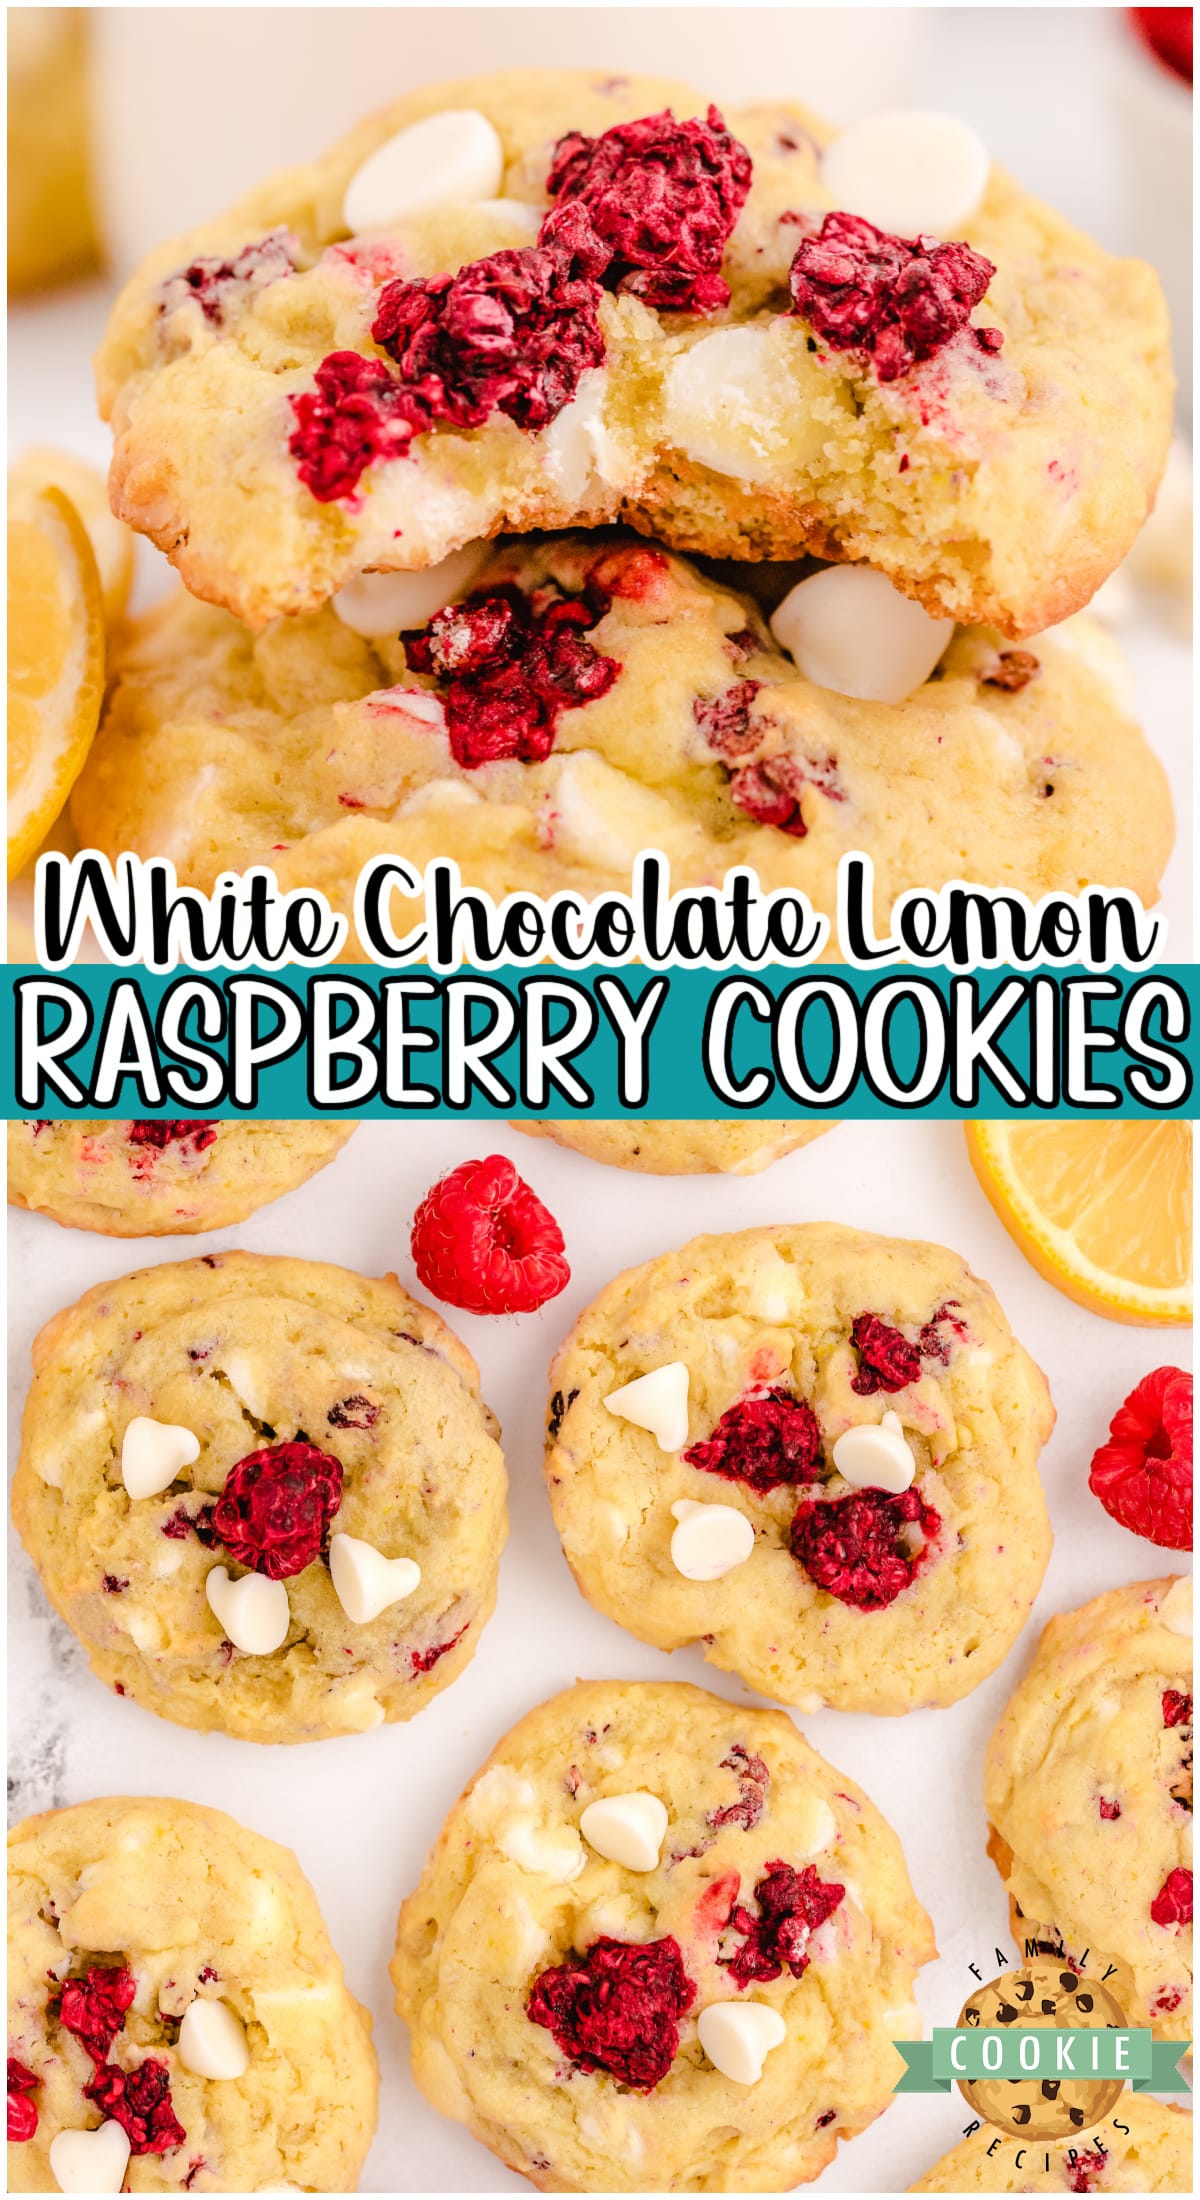 Lemon Raspberry Cookies are soft, chewy cookies made with lemon pudding mix & raspberries! Great flavor and texture to this lemon raspberry cookie with white chocolate chips.